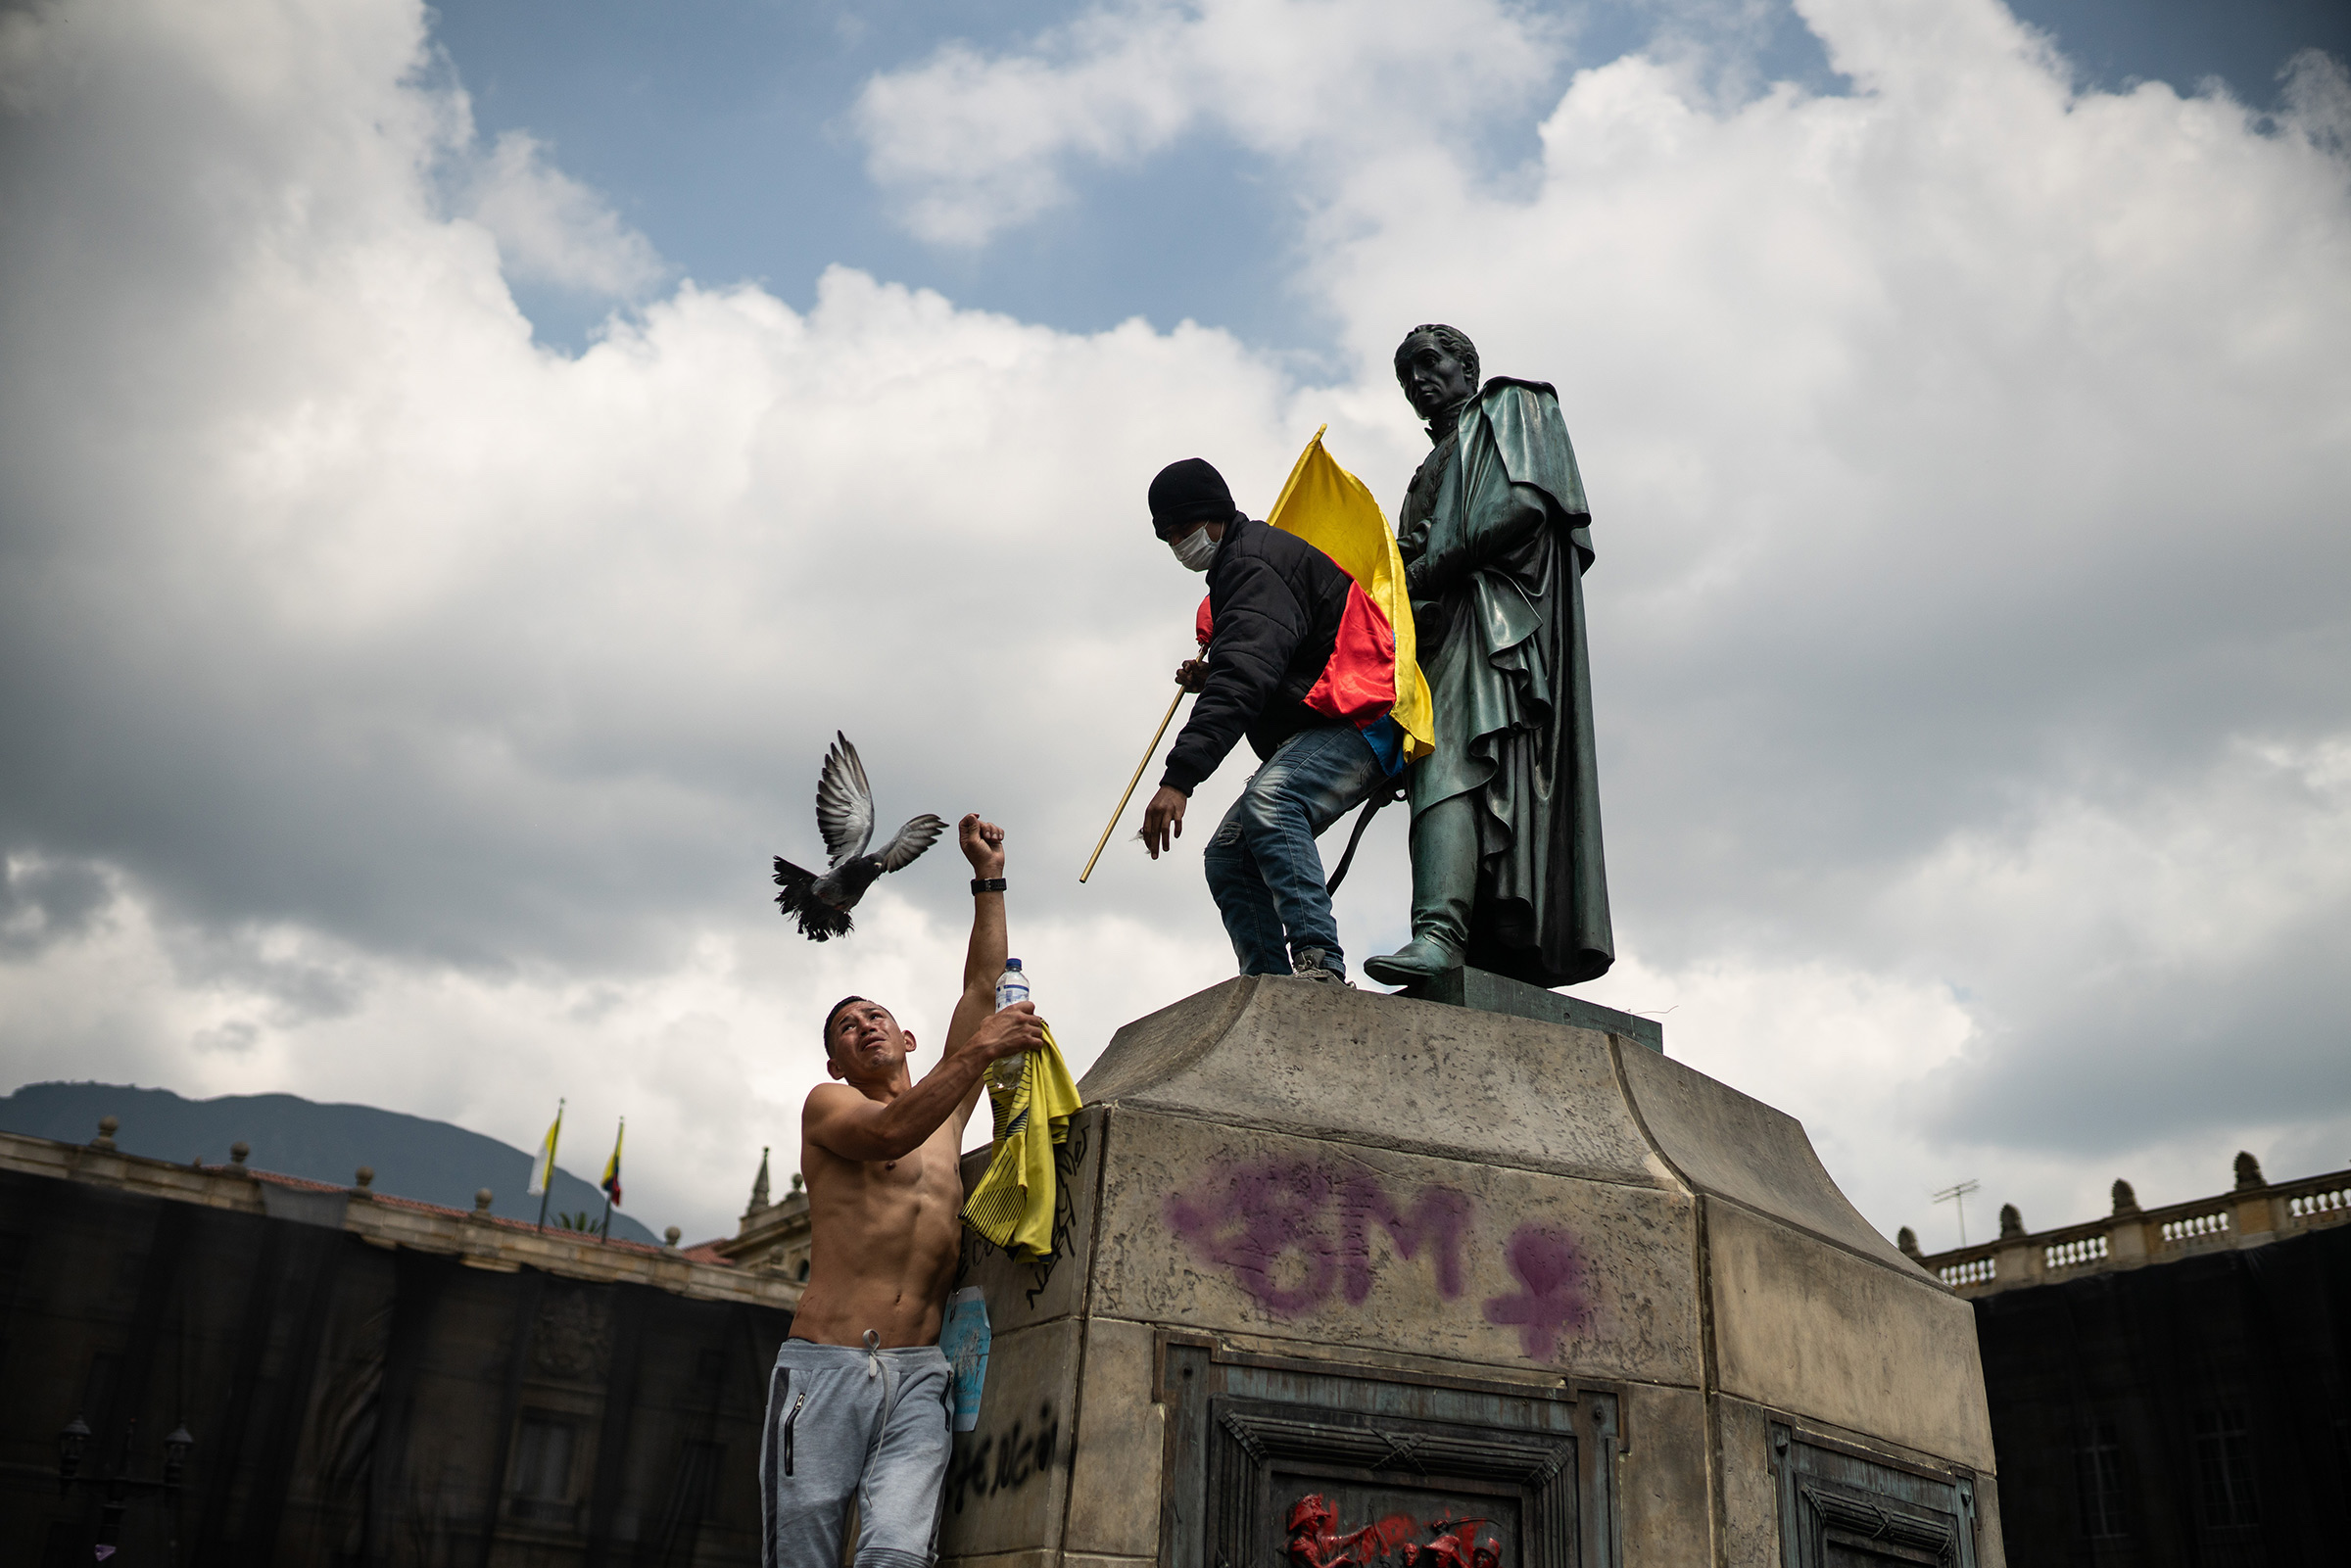 Protesters climb on the statue of Simón Bolívar, the South American independence leader, as thousands of Colombians take to the streets to protest against the government's tax reform in Bogotá on May 1. (Andres Cardona—Reojo Colectivo)